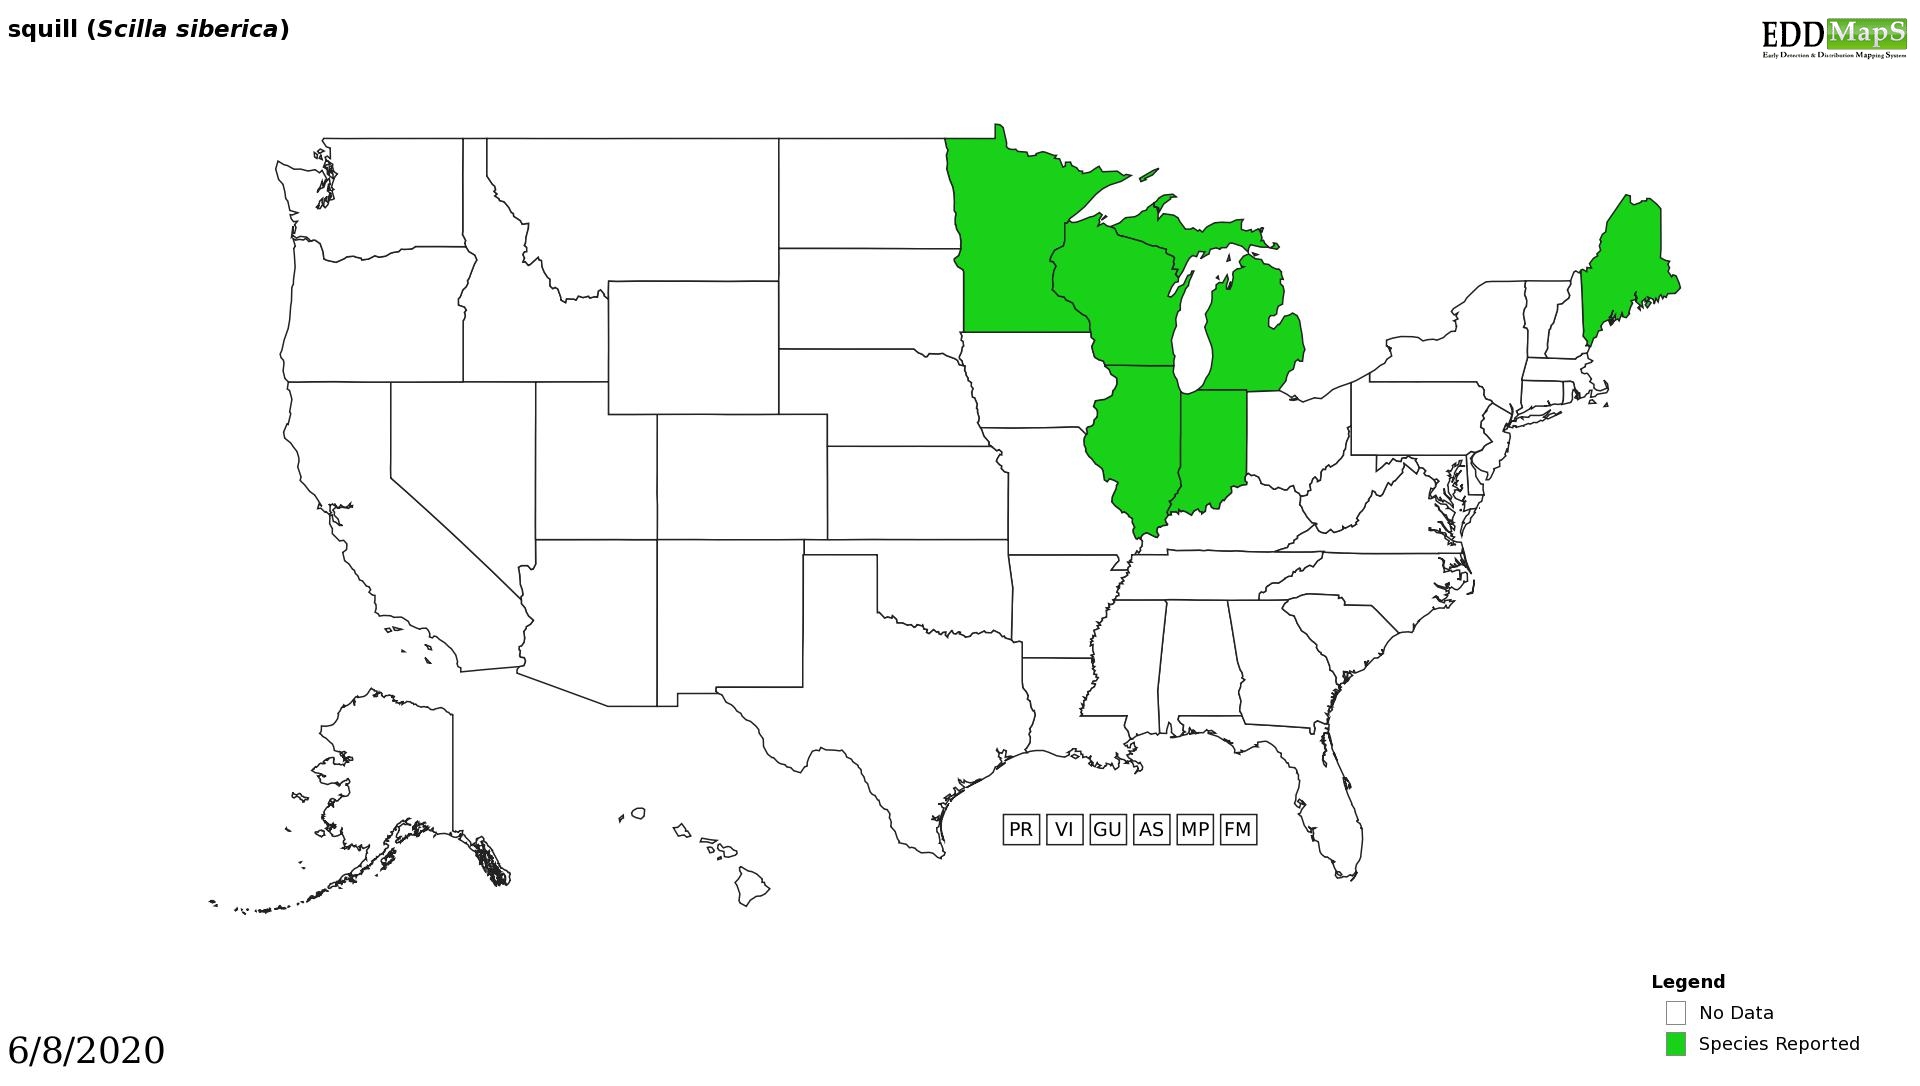 Squill distribution - United States